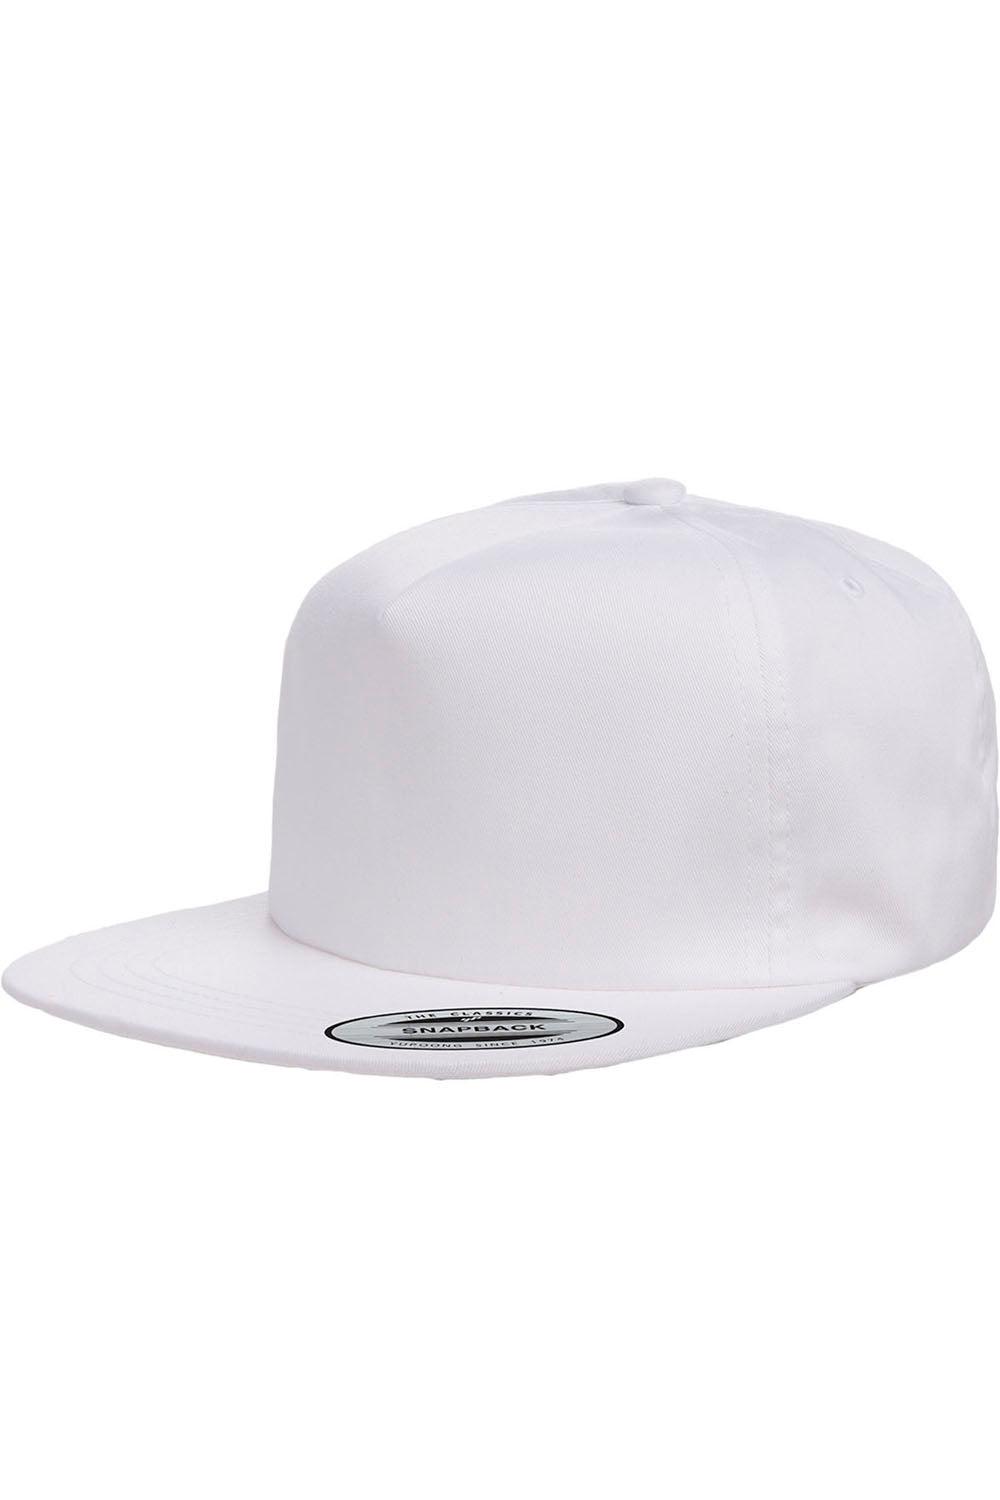 Yupoong Y6502 Mens Adjustable Hat White Front